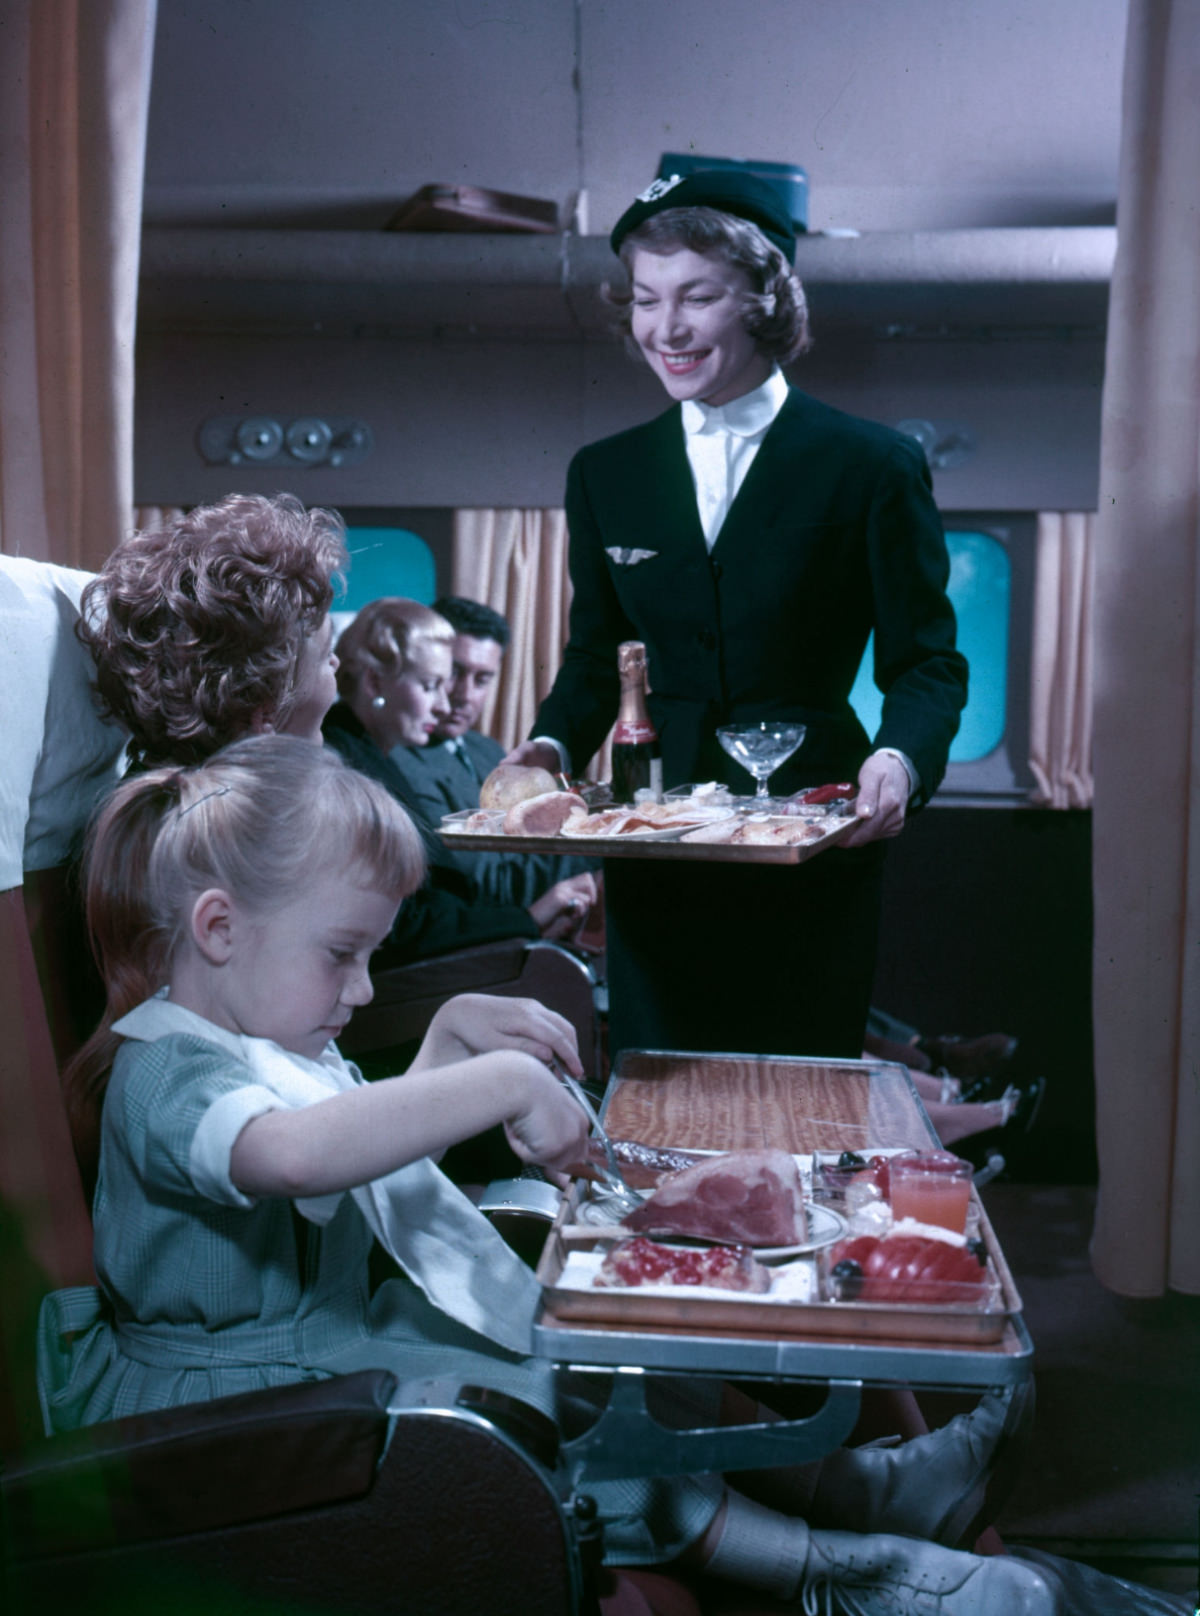 Breakfast in Bed: Vintage Photos of the First Class of Air France in the 1950s